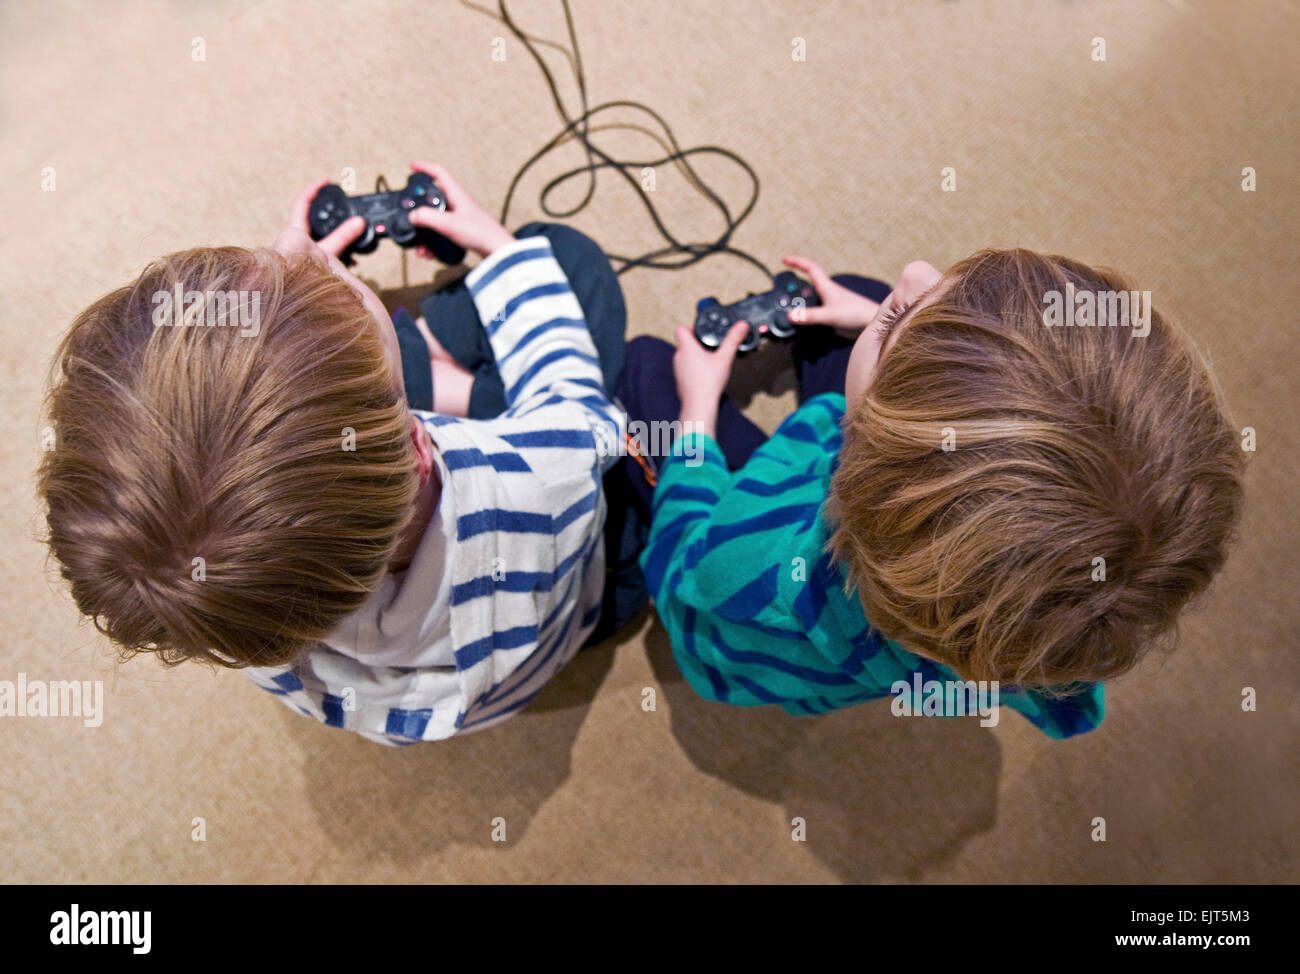 Two boys play with their Playstation console remotes Stock Photo